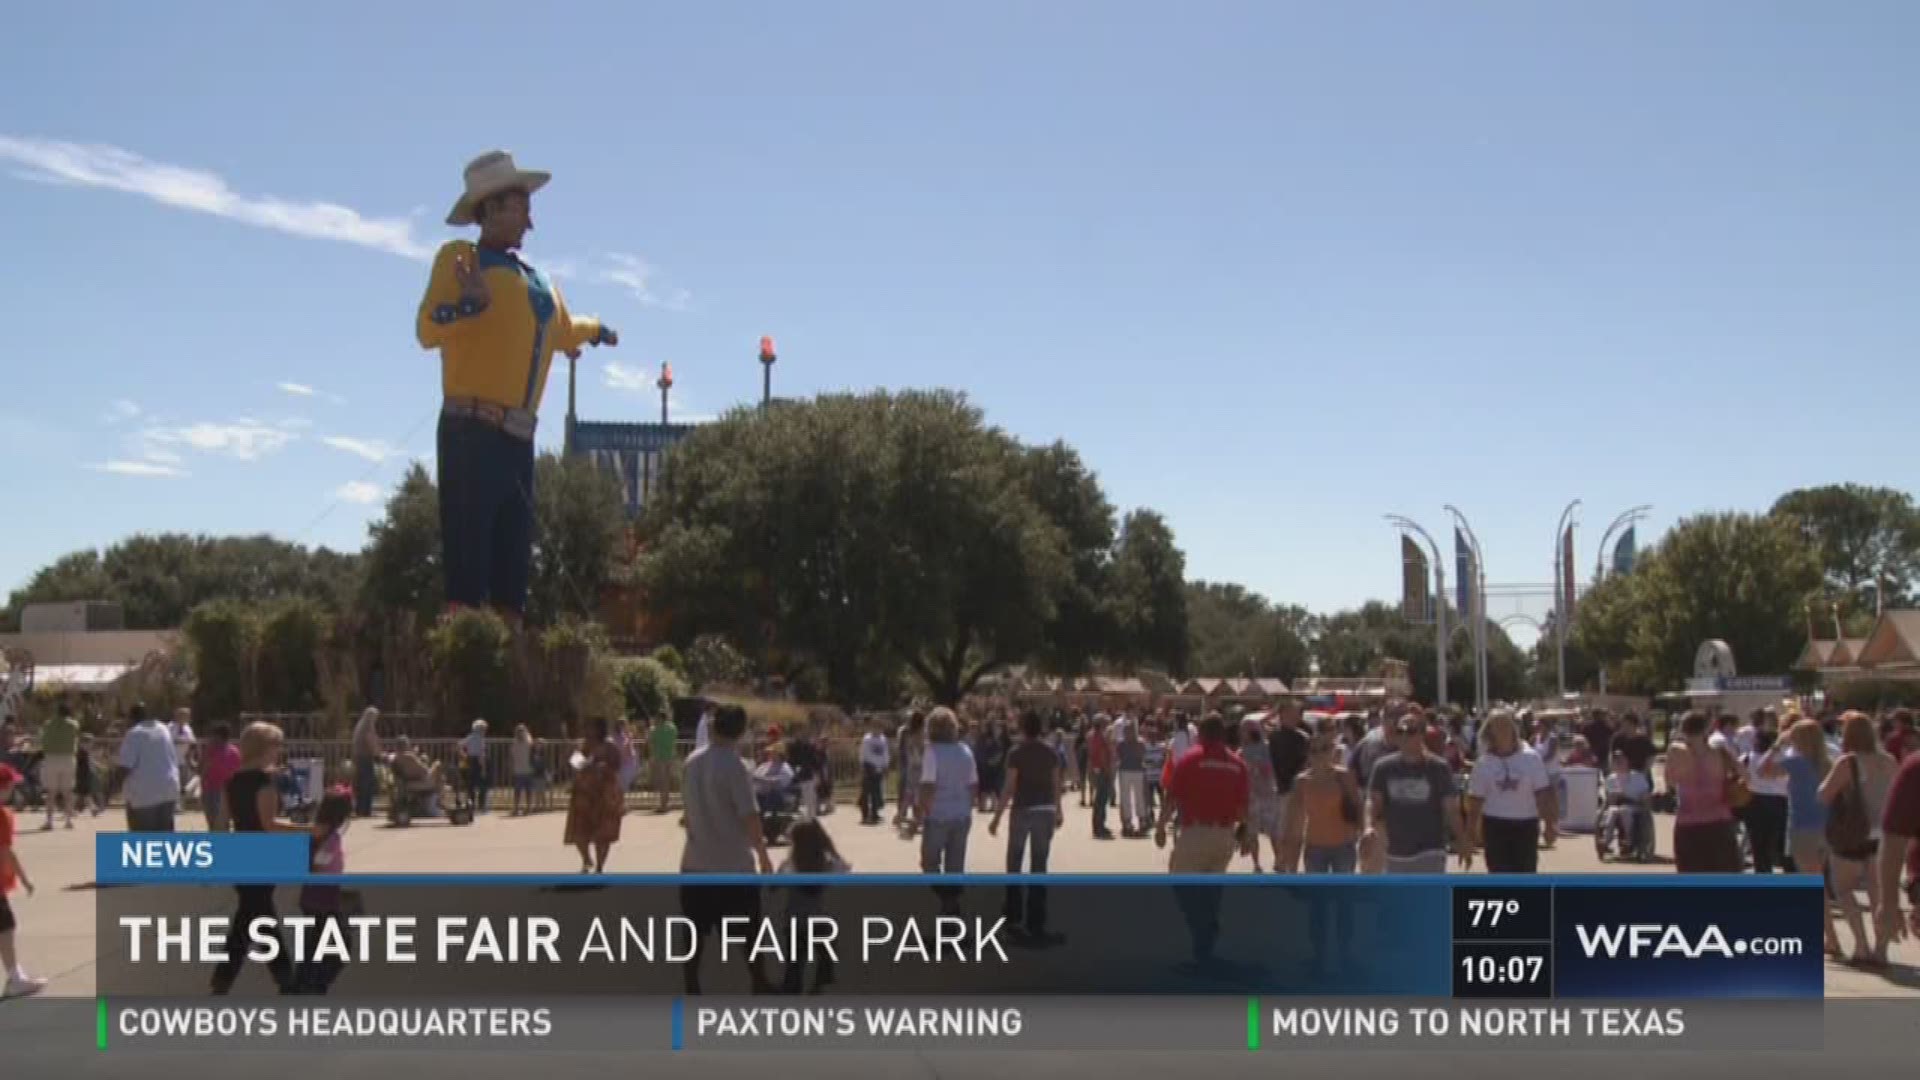 While the City of Dallas owns and manages Fair Park, for decades, the State Fair of Texas has been the major tenant and money maker. But as South Dallas changes, what's to come for Fair Park? News 8's Brett Shipp has more.